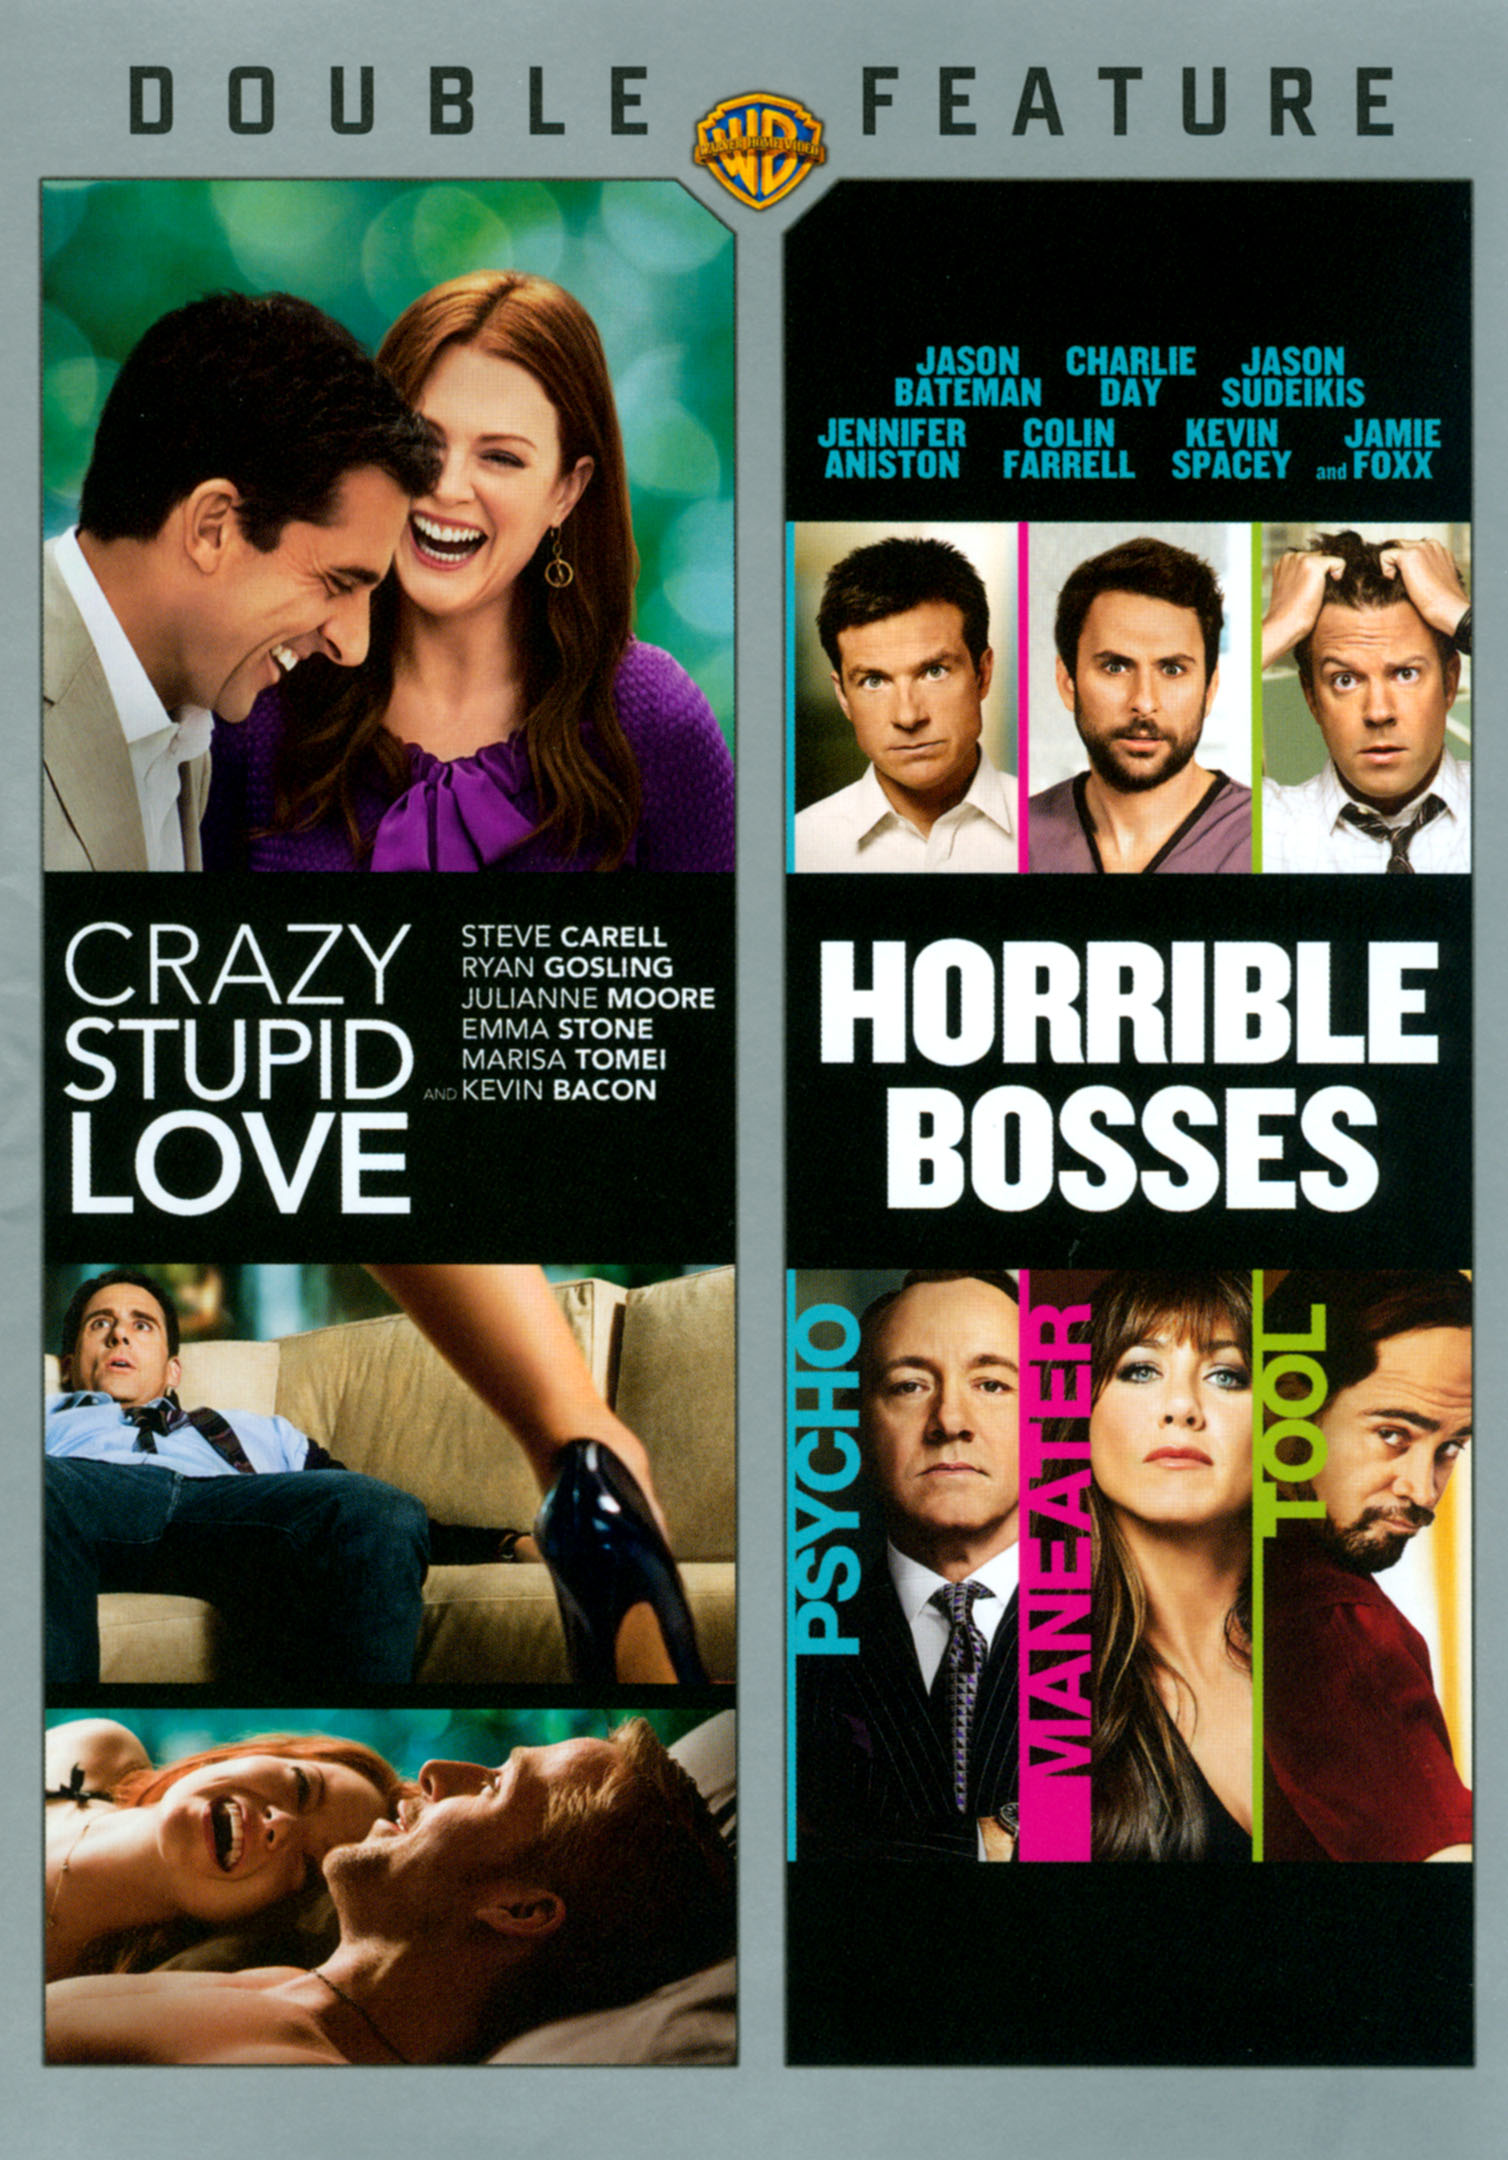 Crazy, Stupid, Love.' works most of the time – Orange County Register